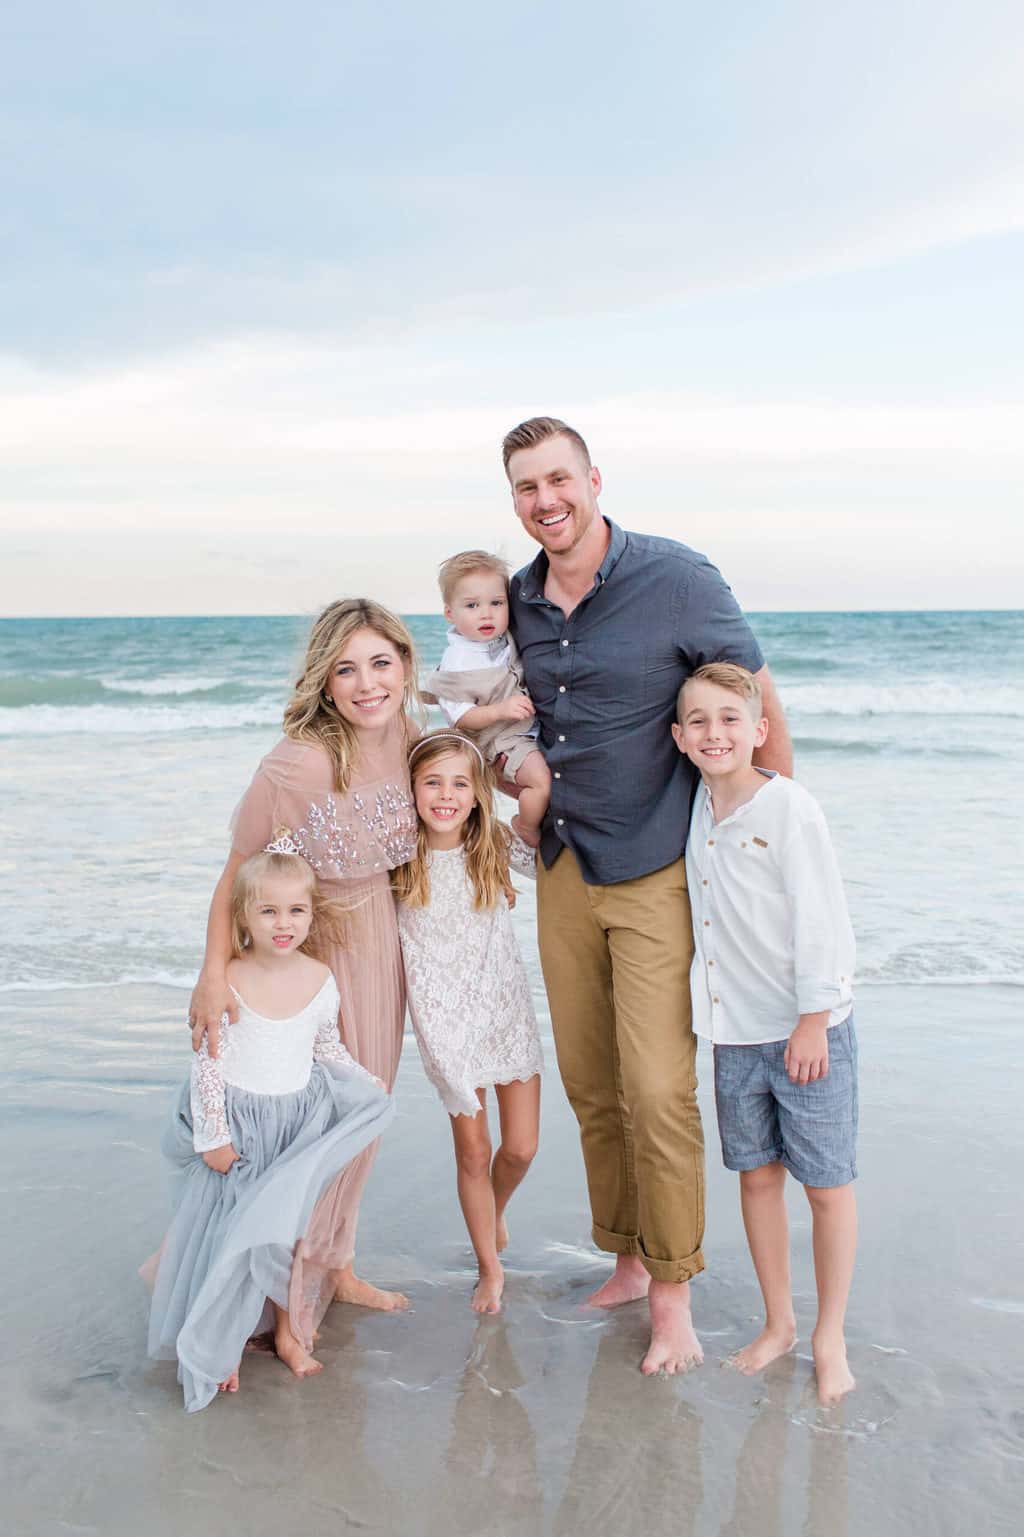 Family Picture Ideas In The Beach - photopostsblog.com